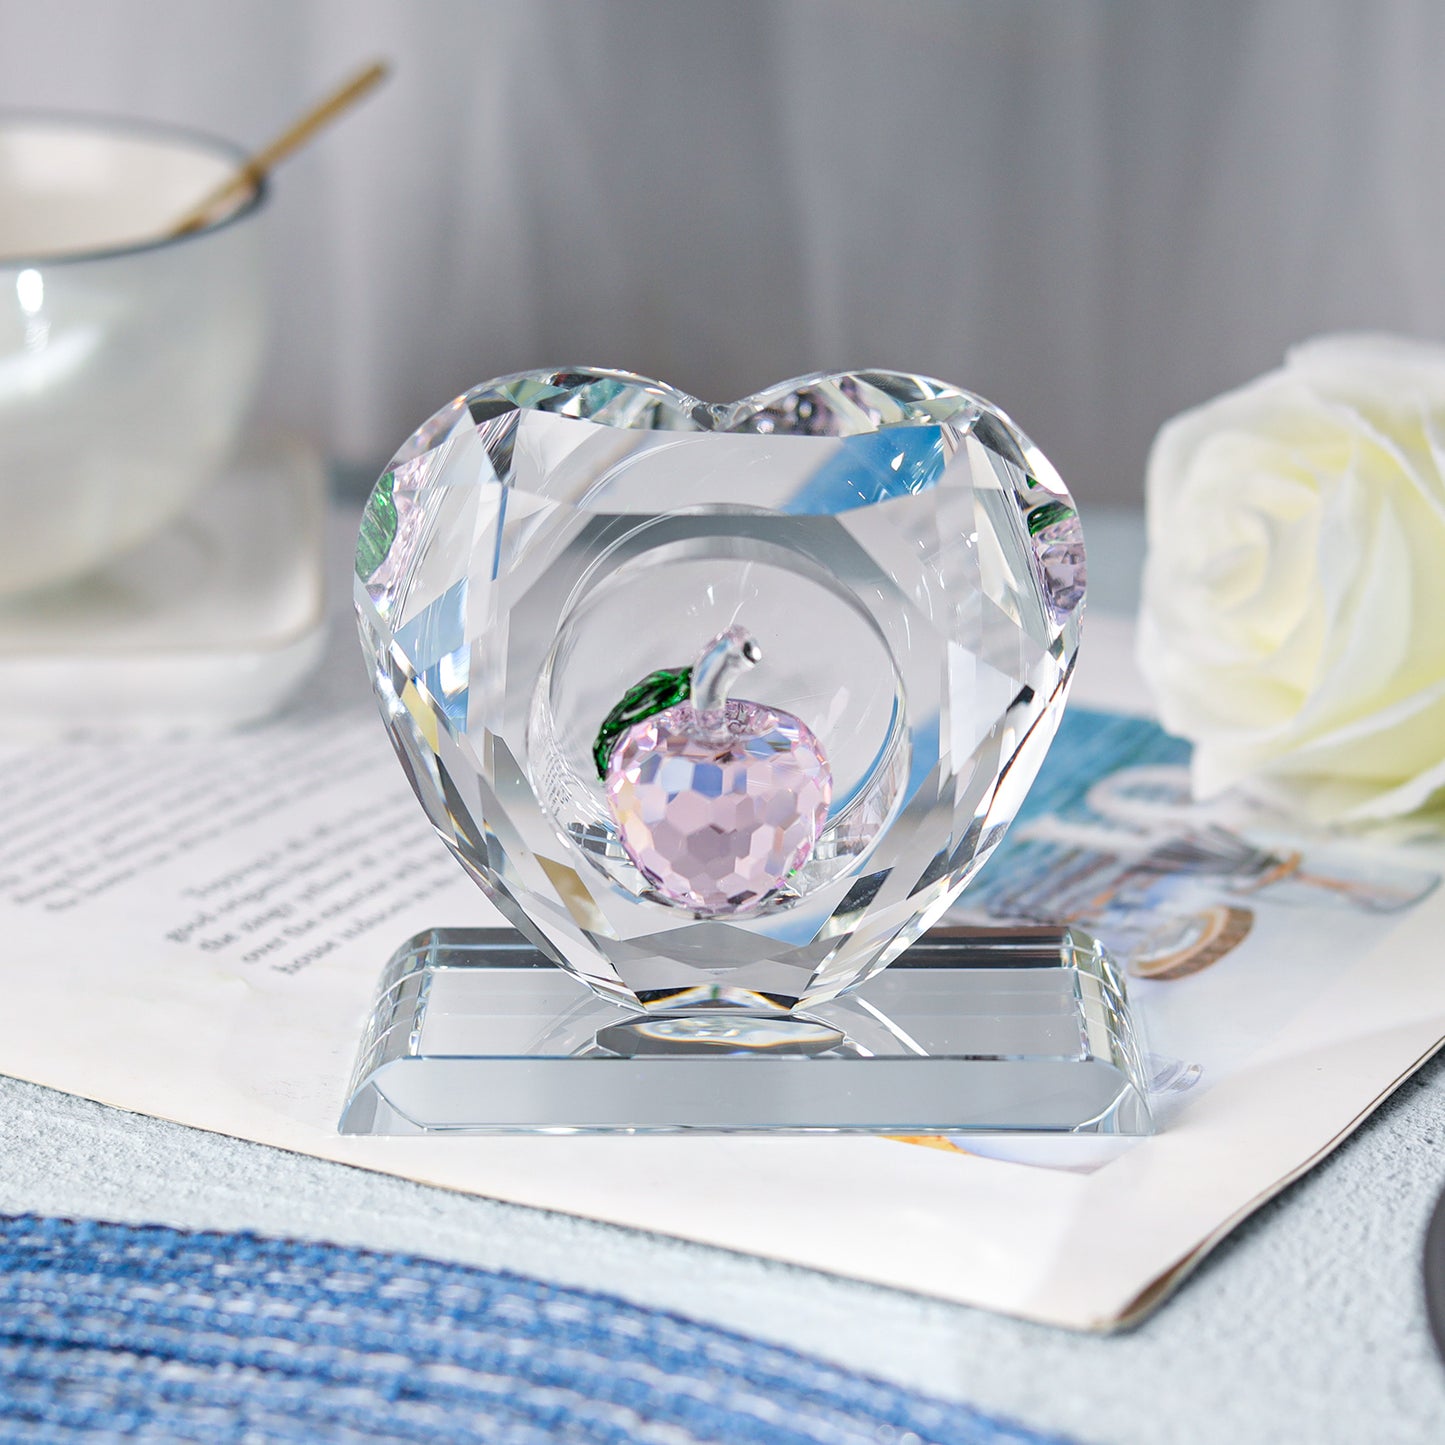 Heart-shaped Crystal Paperweight with Colorful Apple